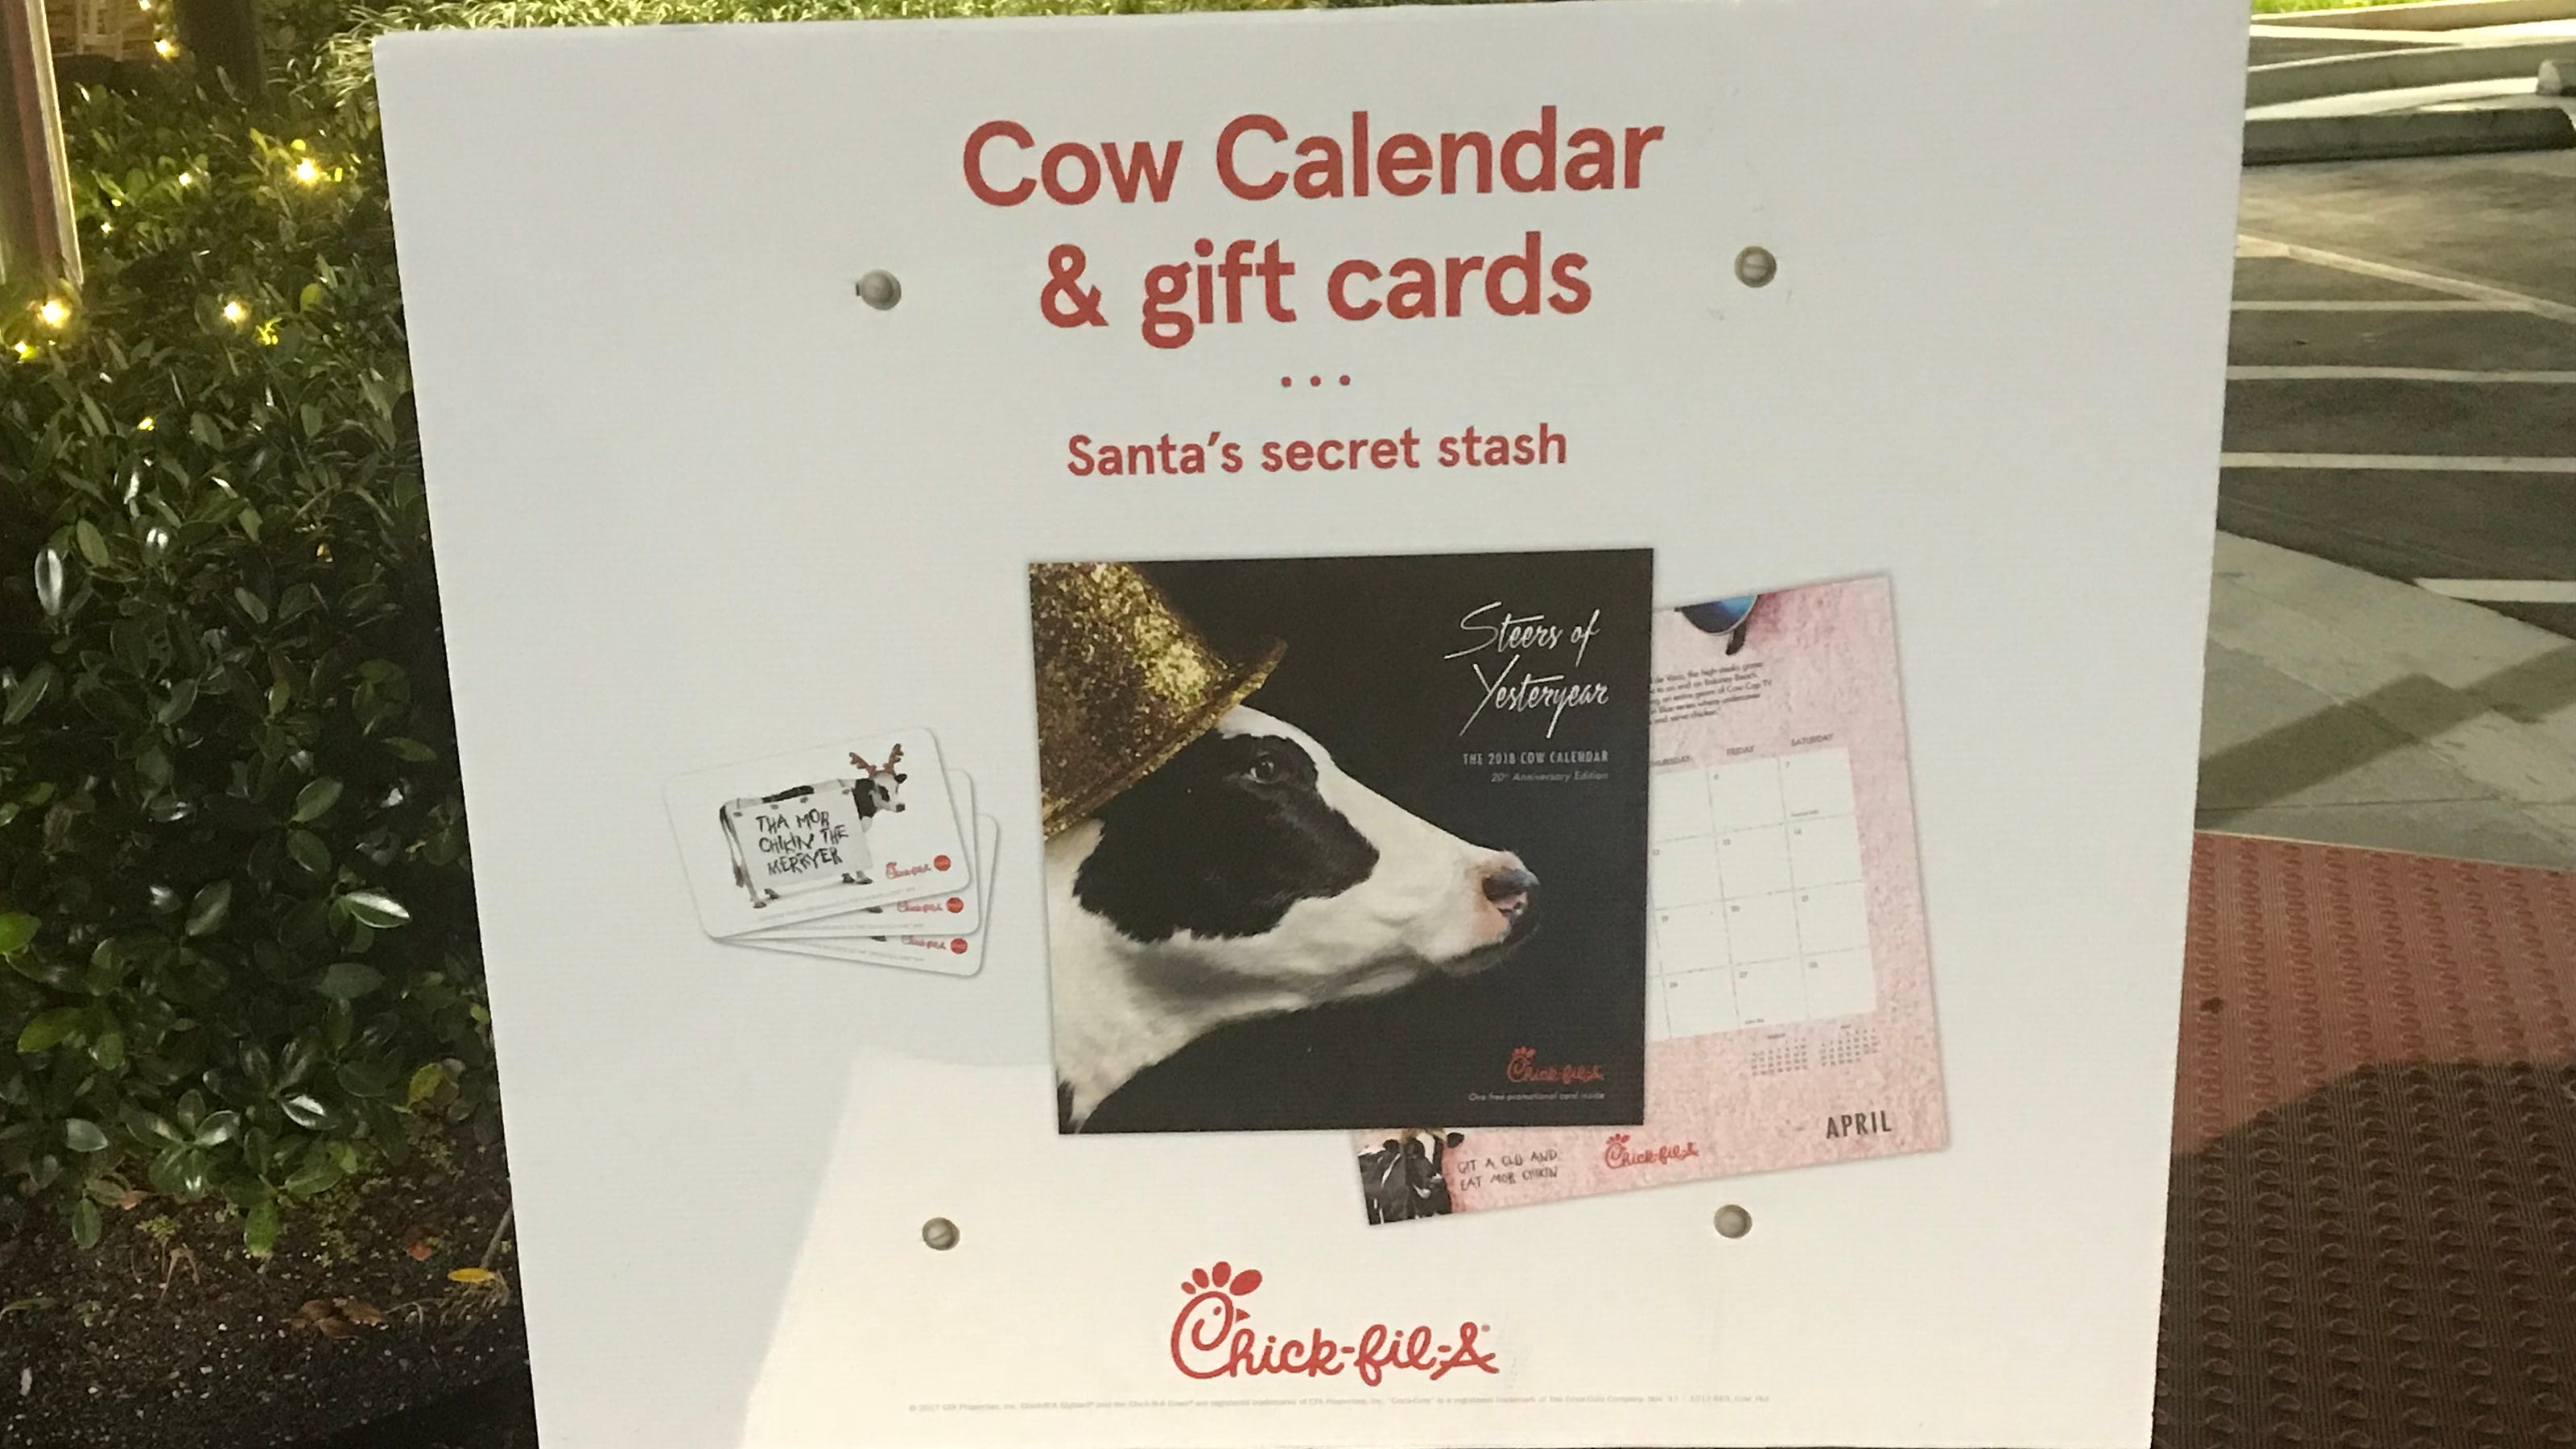 ChickfilA says it will end popular Cow Calendar at end of year